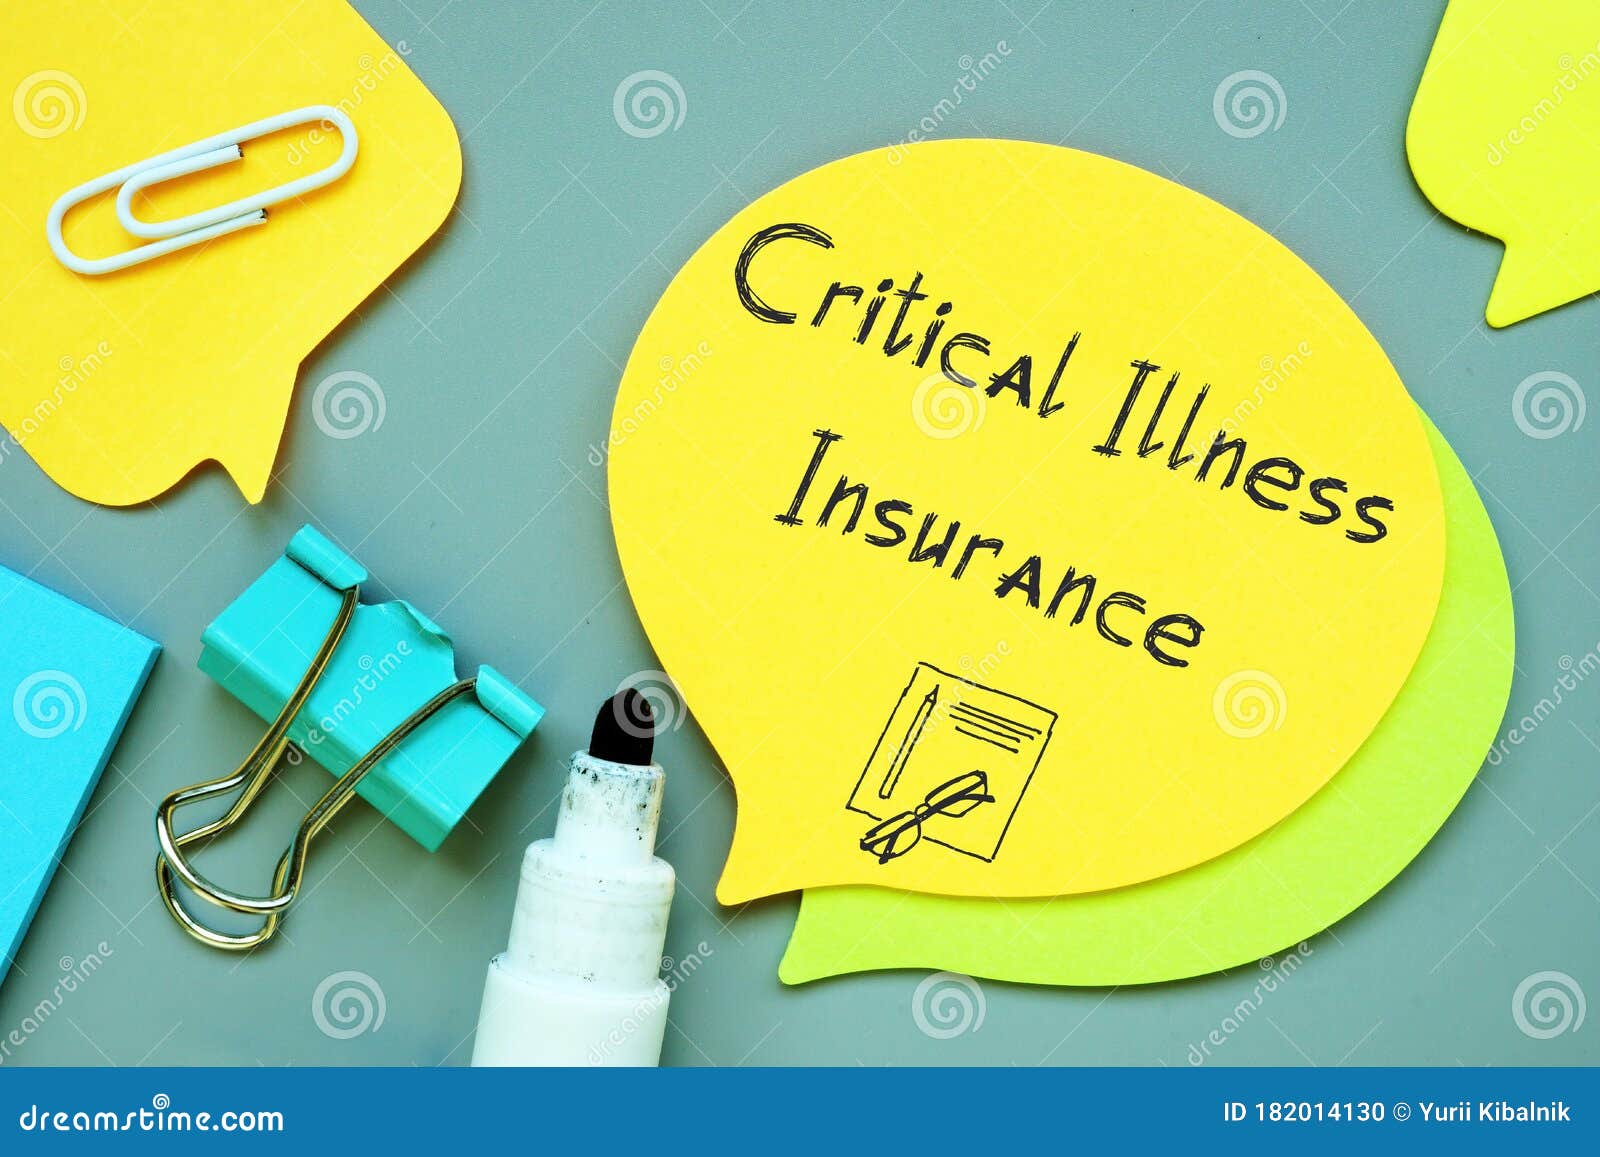 business concept meaning critical illness insurance with inscription on the page